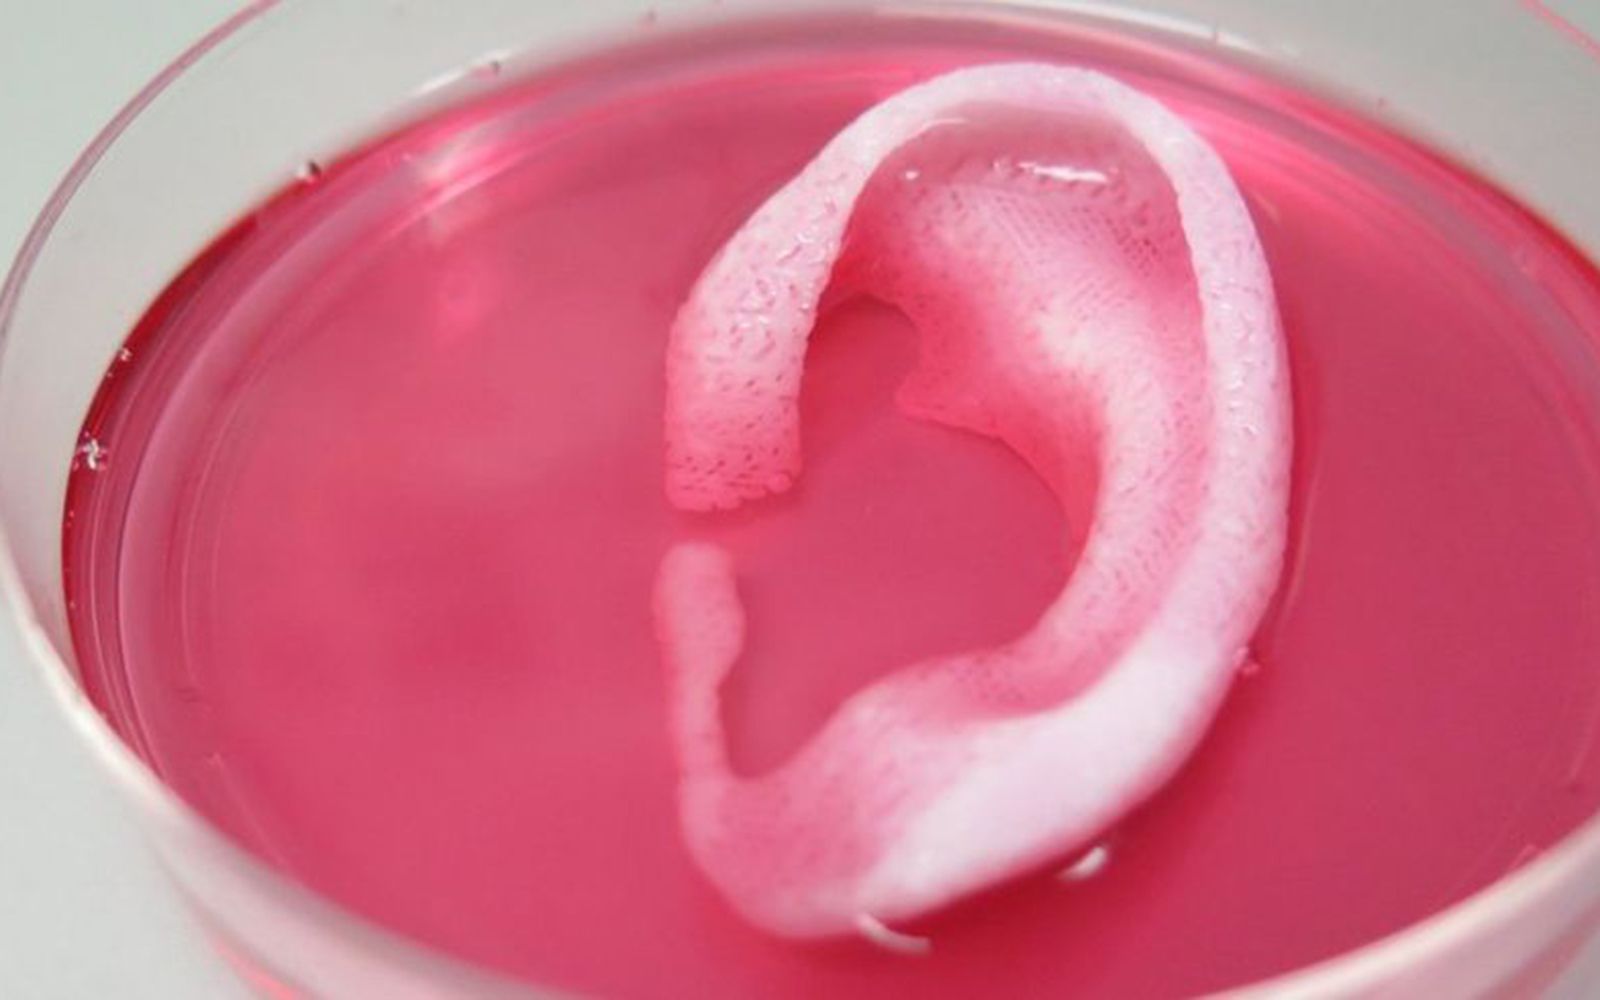 3d printed body parts are here jaw dropping print a new one image 1